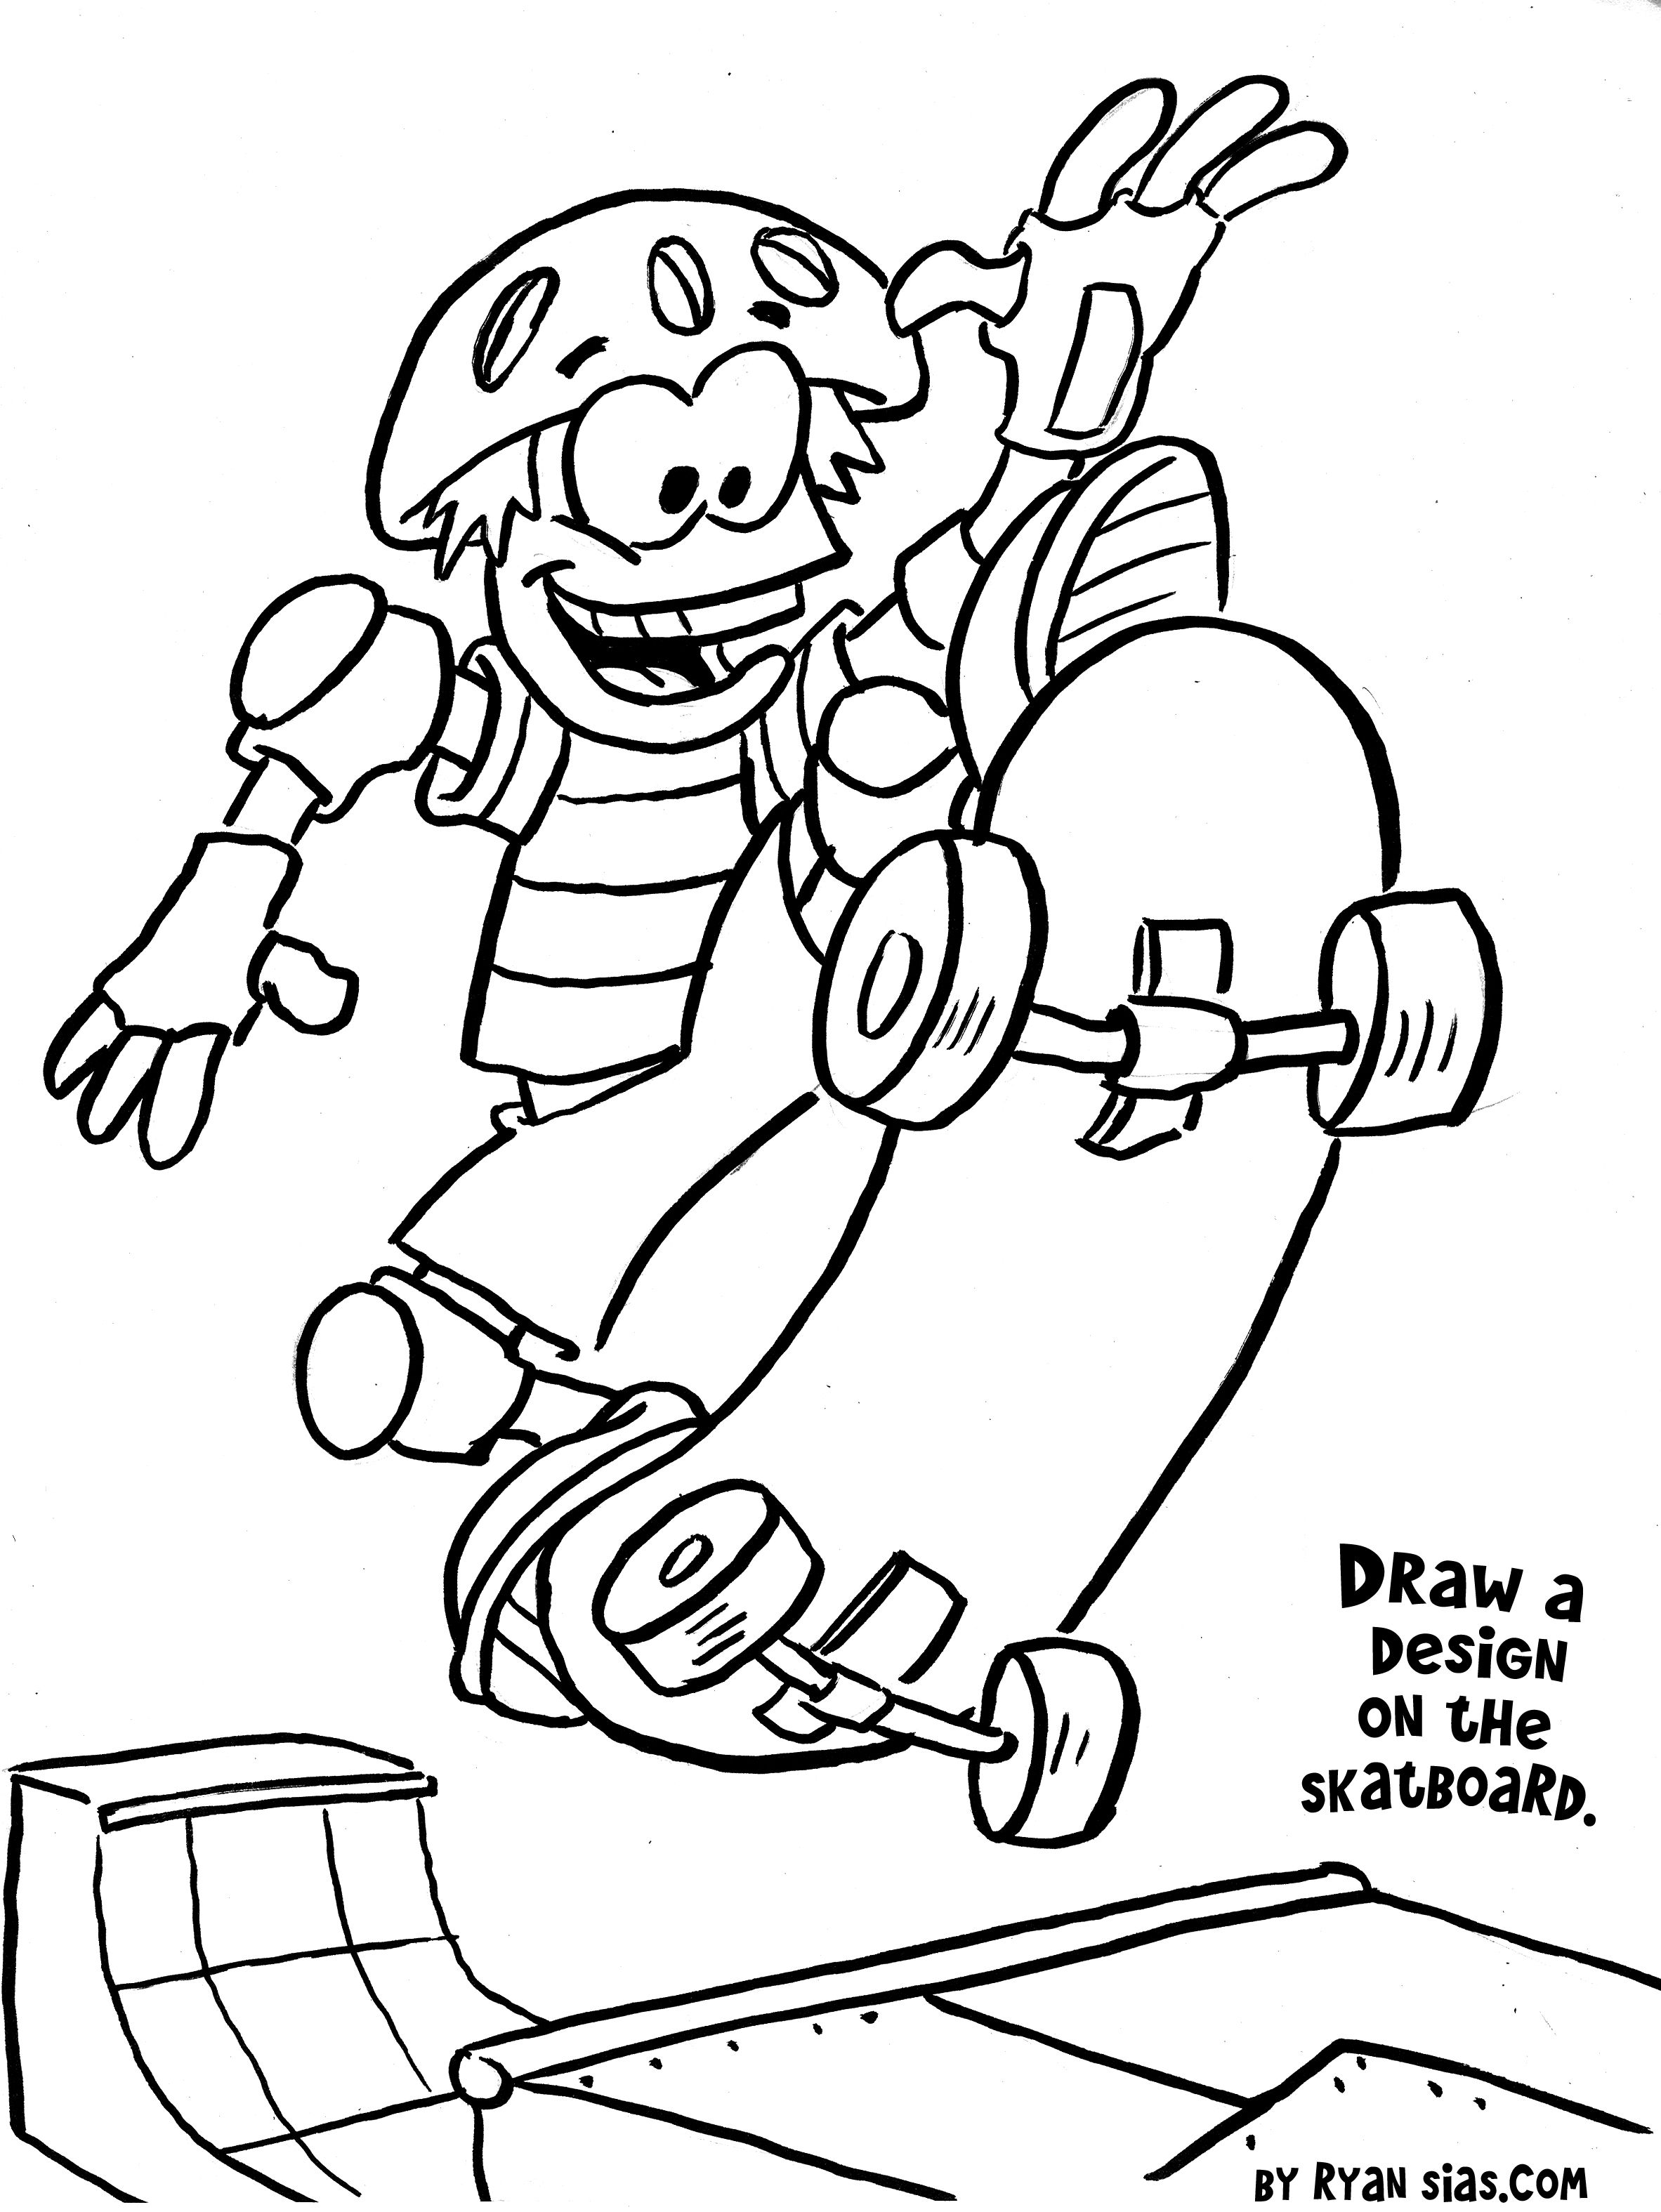 get-this-sports-coloring-pages-free-printable-k2rww